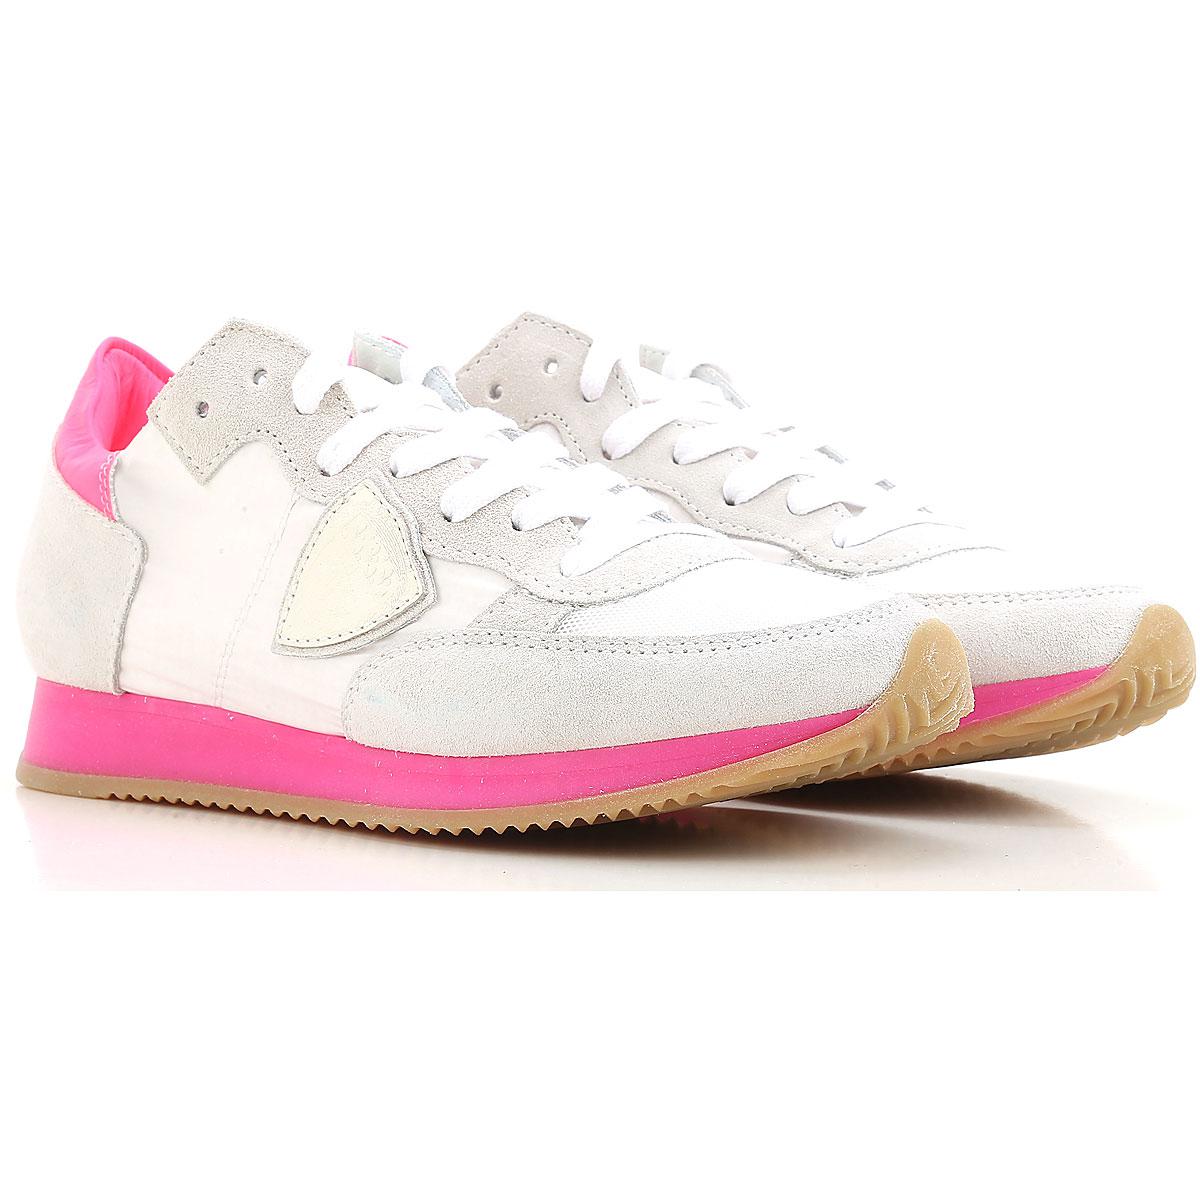 Philippe Model Sneakers For Women On Sale in White - Lyst